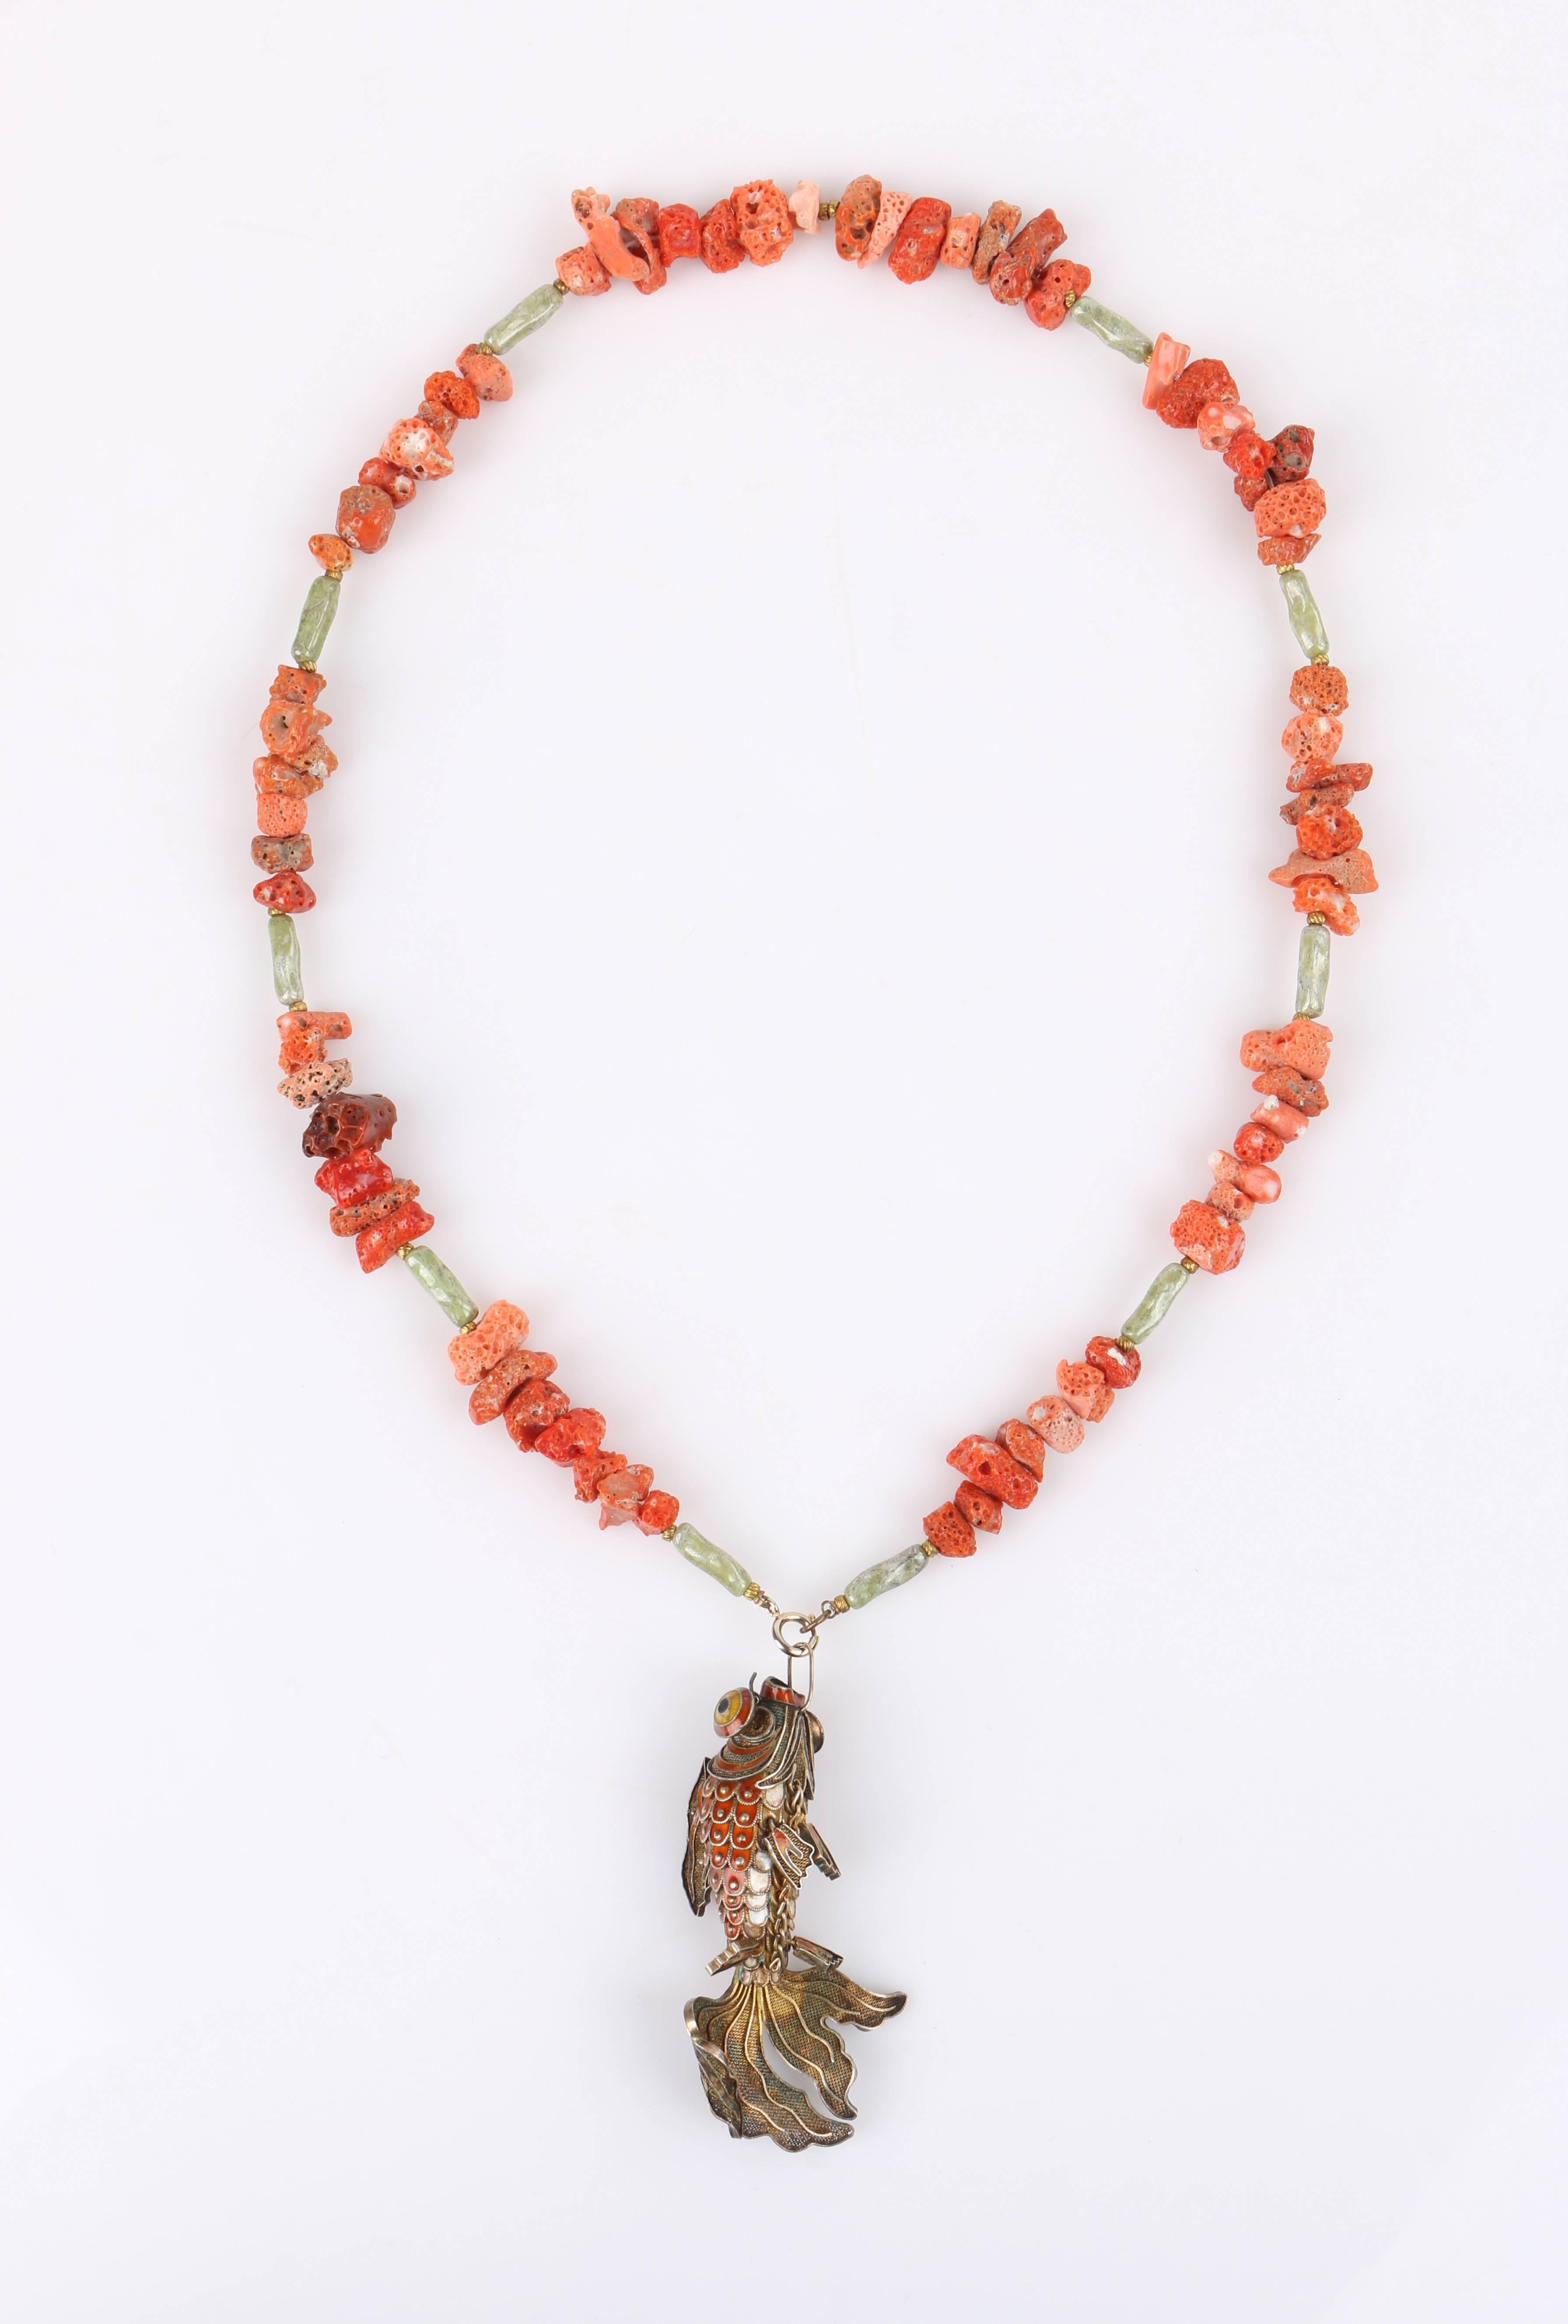 Women's Vintage Raw Coral & Jade Articulated Cloisonne Enamel Koi Fish Pendant Necklace For Sale